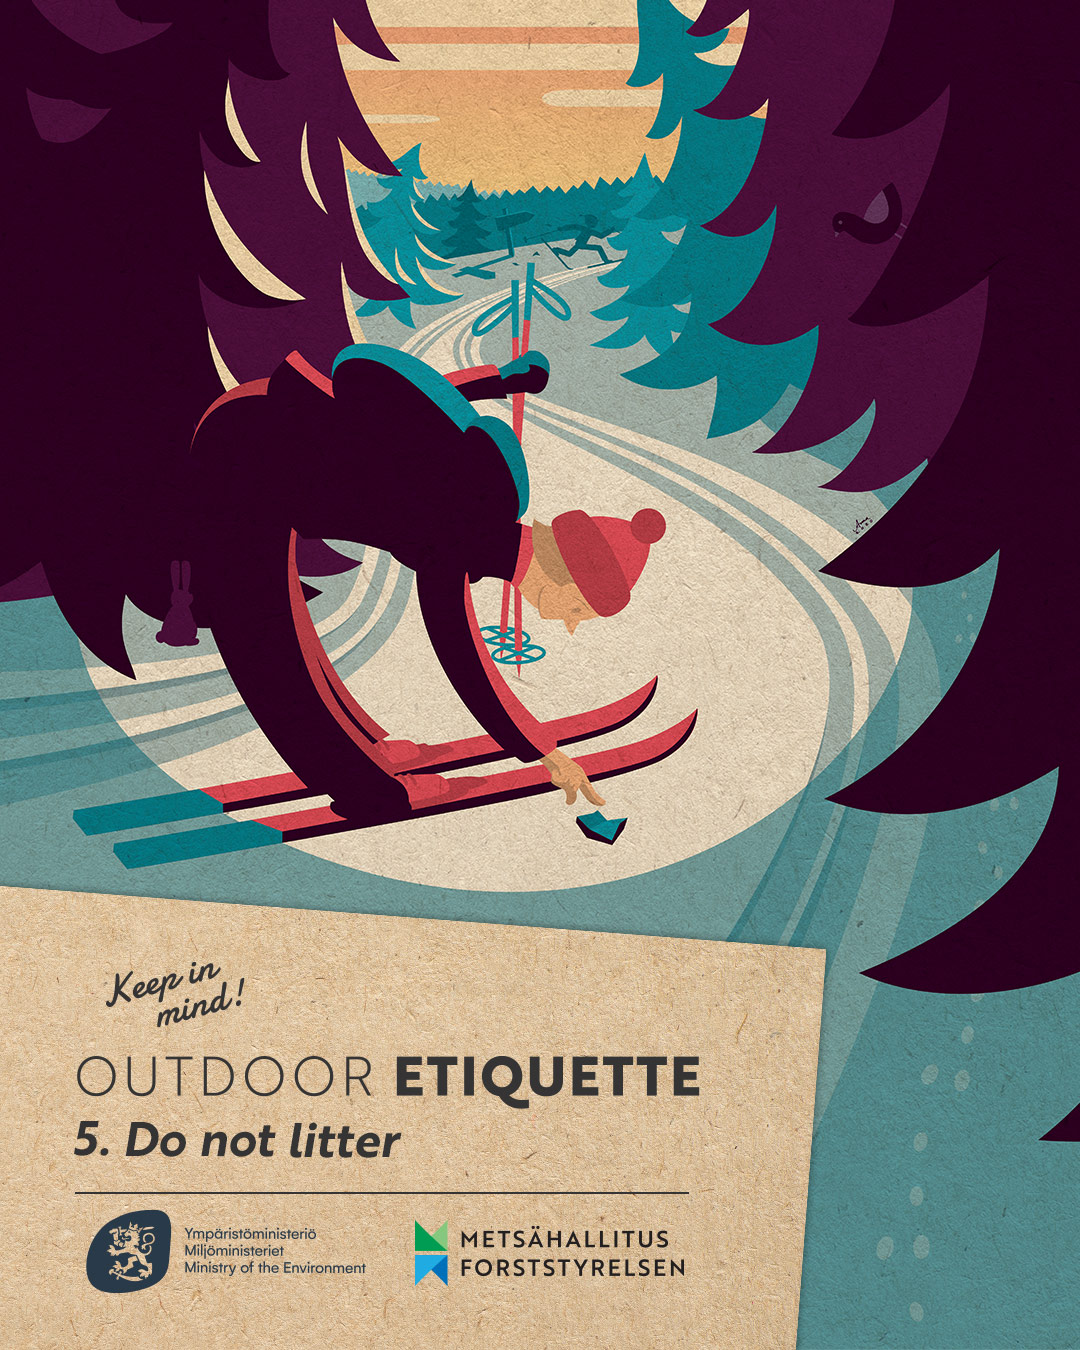 A skier on a ski trail picking up litter from the side of the trail and the text at the bottom: Outdoor etiquette: 5. Do not litter